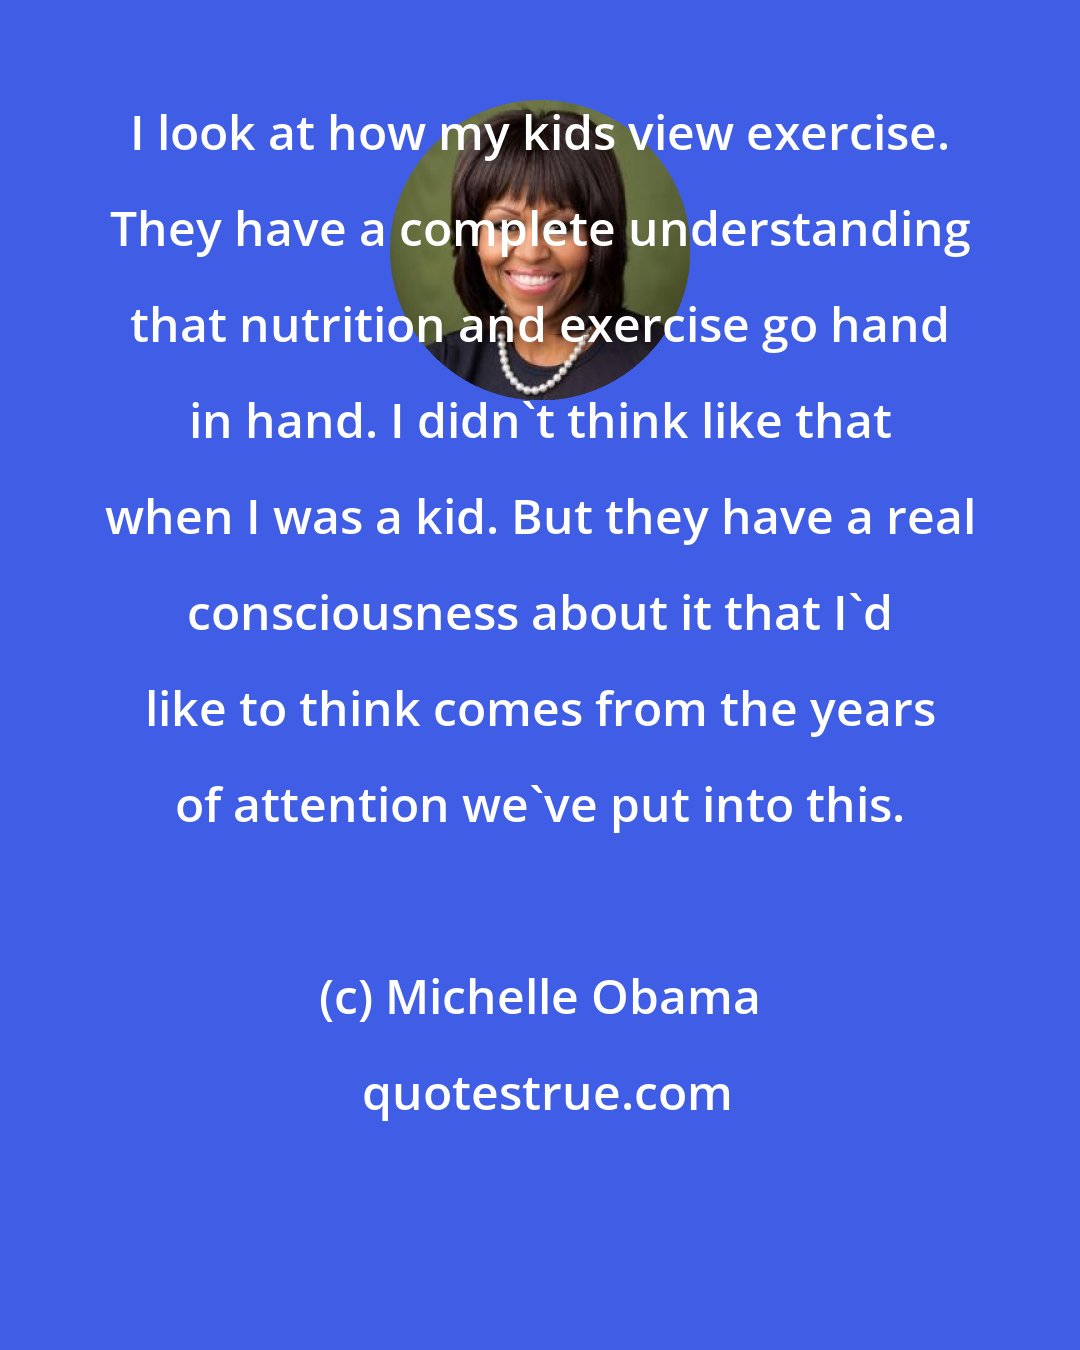 Michelle Obama: I look at how my kids view exercise. They have a complete understanding that nutrition and exercise go hand in hand. I didn't think like that when I was a kid. But they have a real consciousness about it that I'd like to think comes from the years of attention we've put into this.